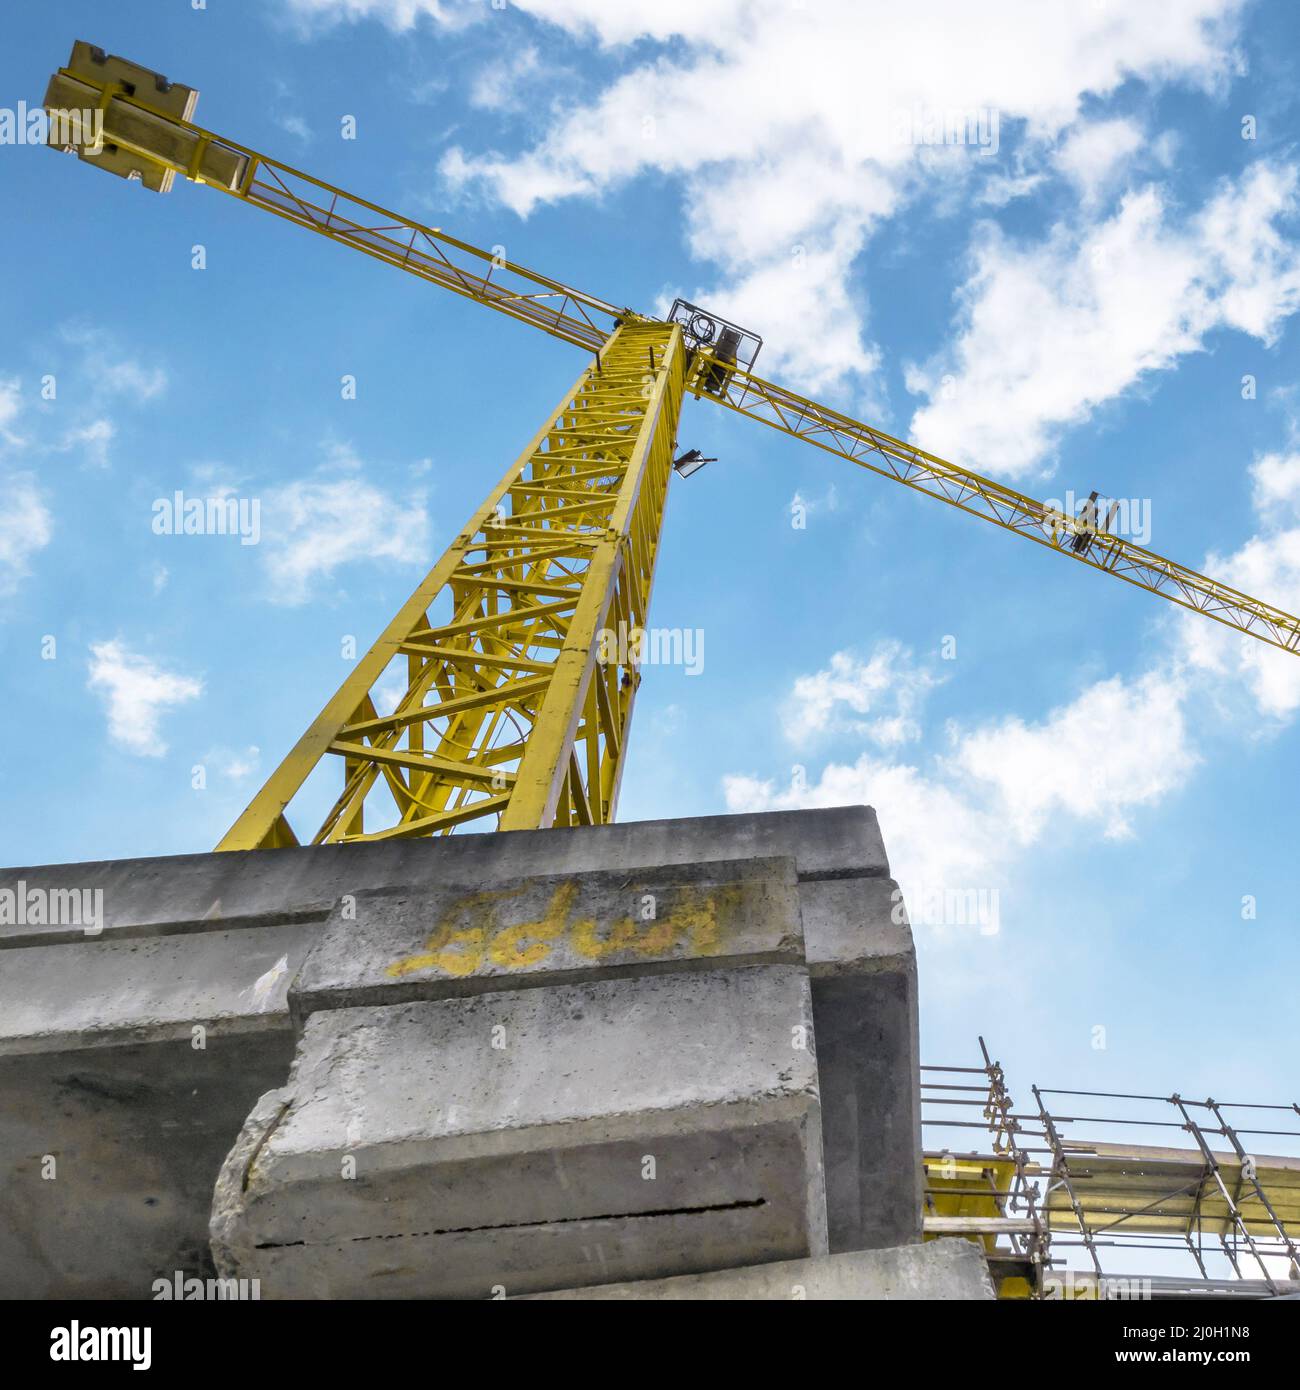 Crane and building under construction Stock Photo